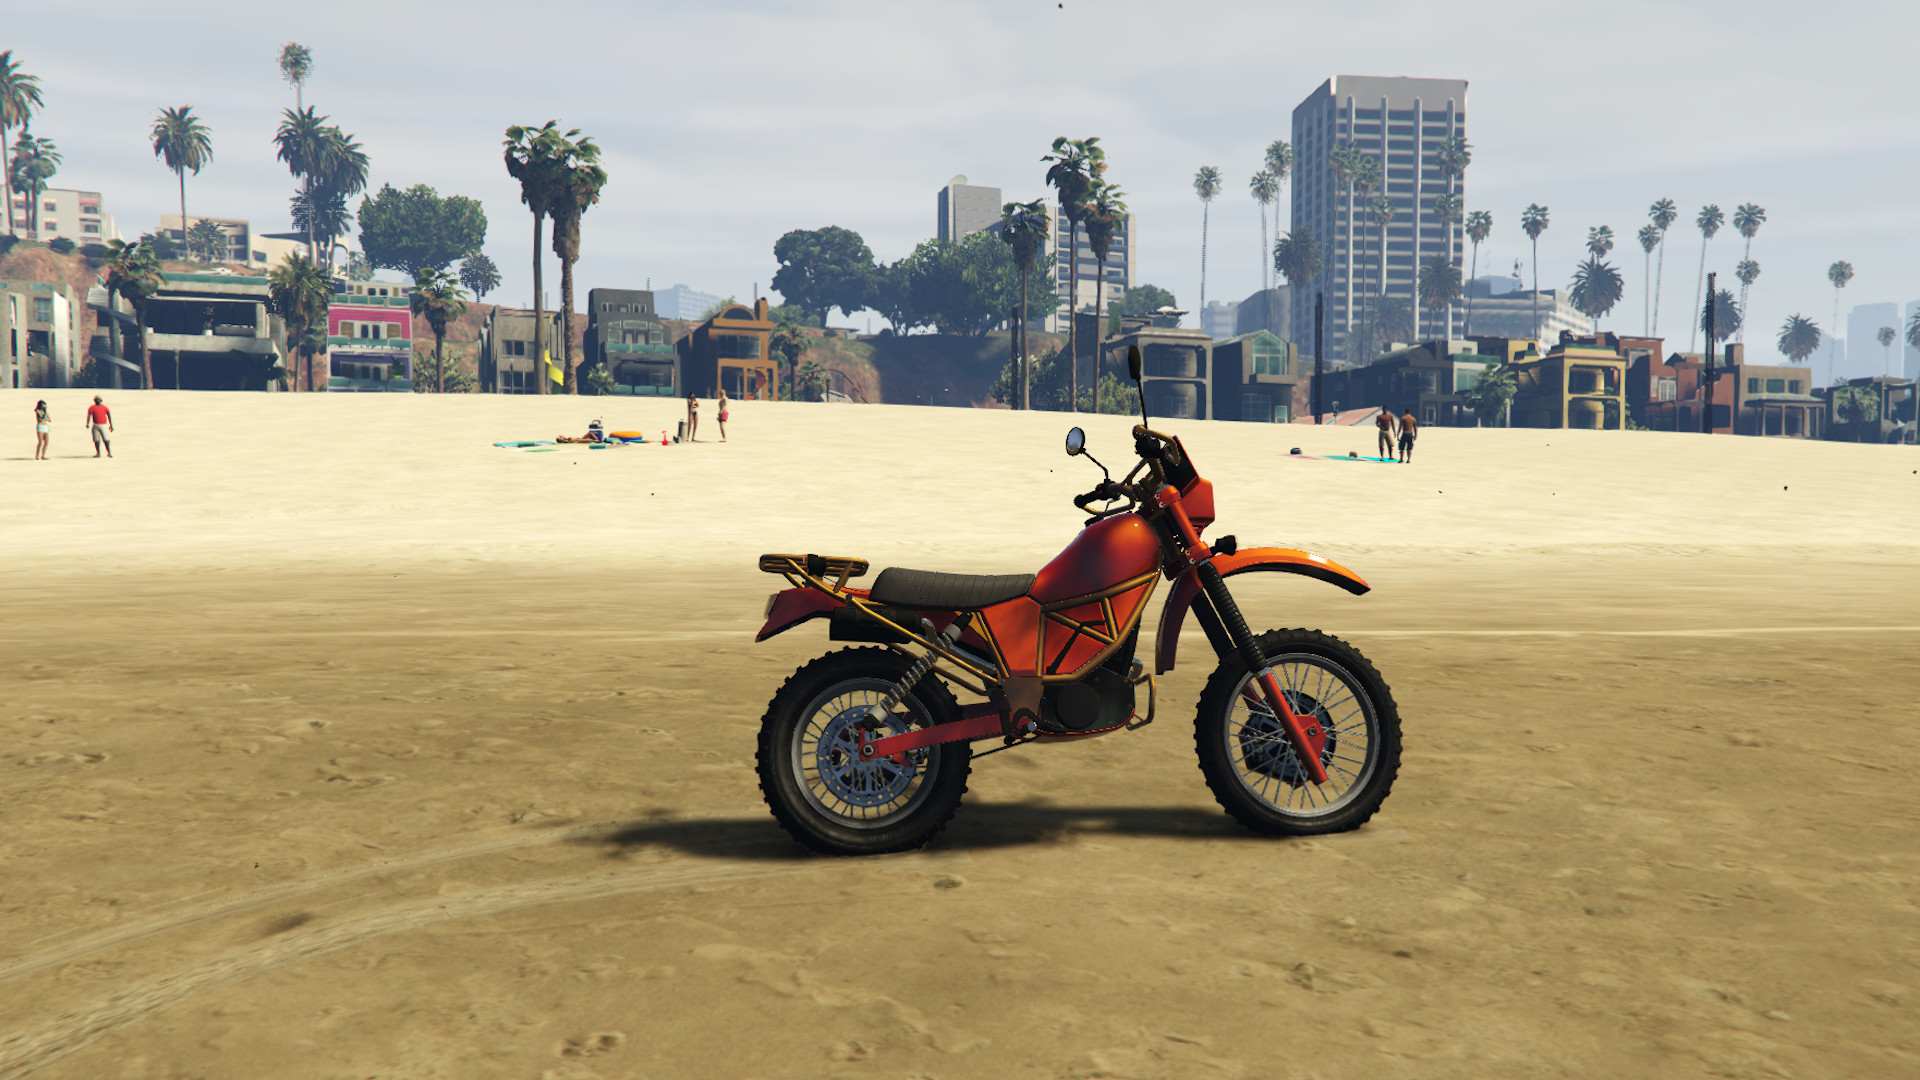 GTA Online fastest bikes: An off-road bike parked on the beach, with people relaxing in the background.